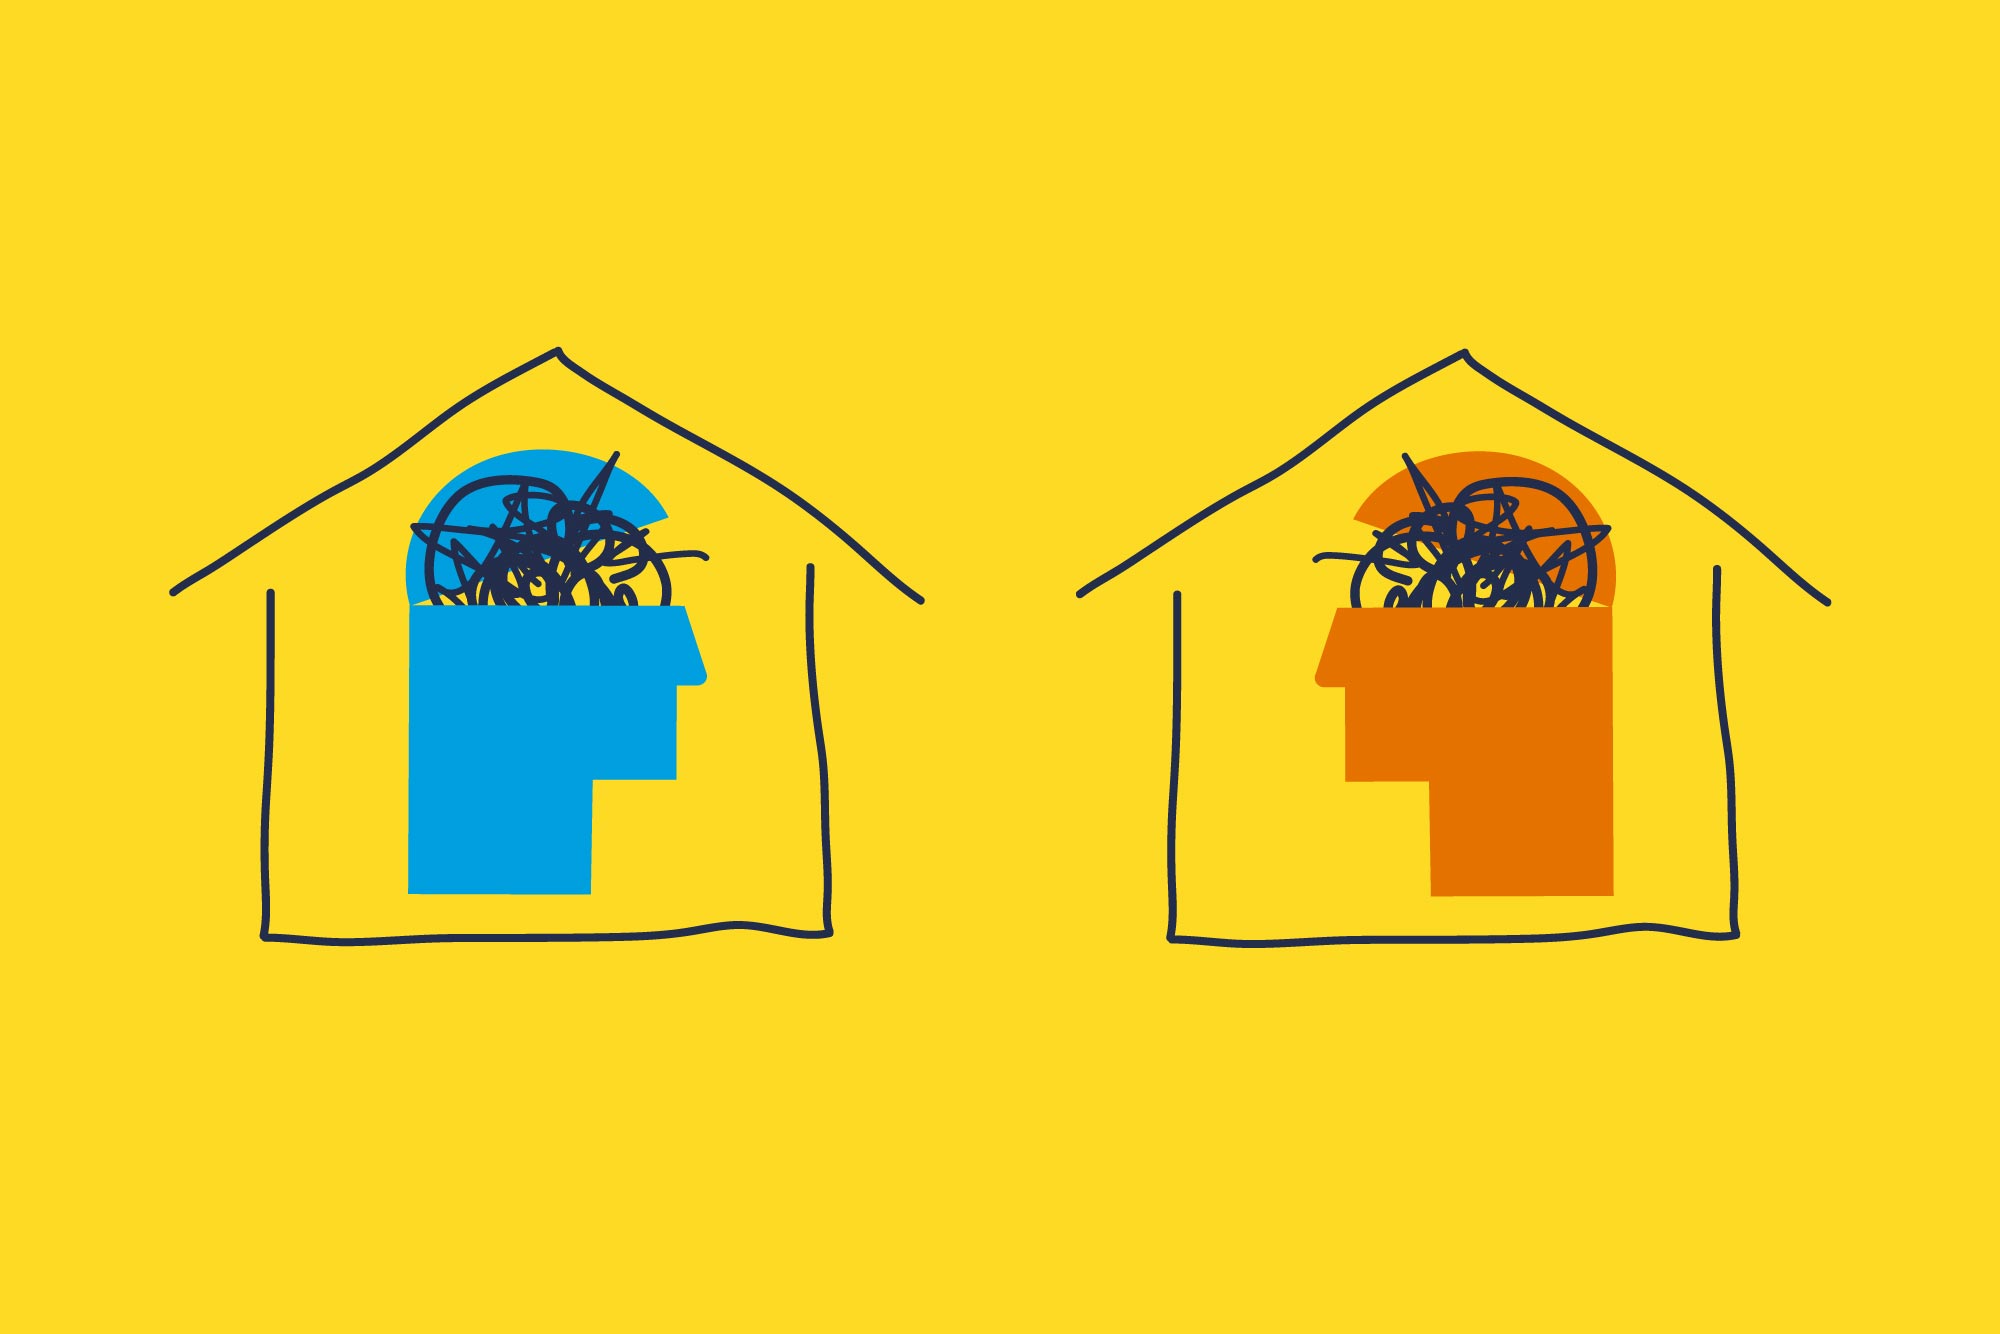 Illustration of two simply drawn houses with one illustrated profile of a head. The heads open up at the forehead and squiggly lines come out. Left house has a blue head and the right house has an orange head